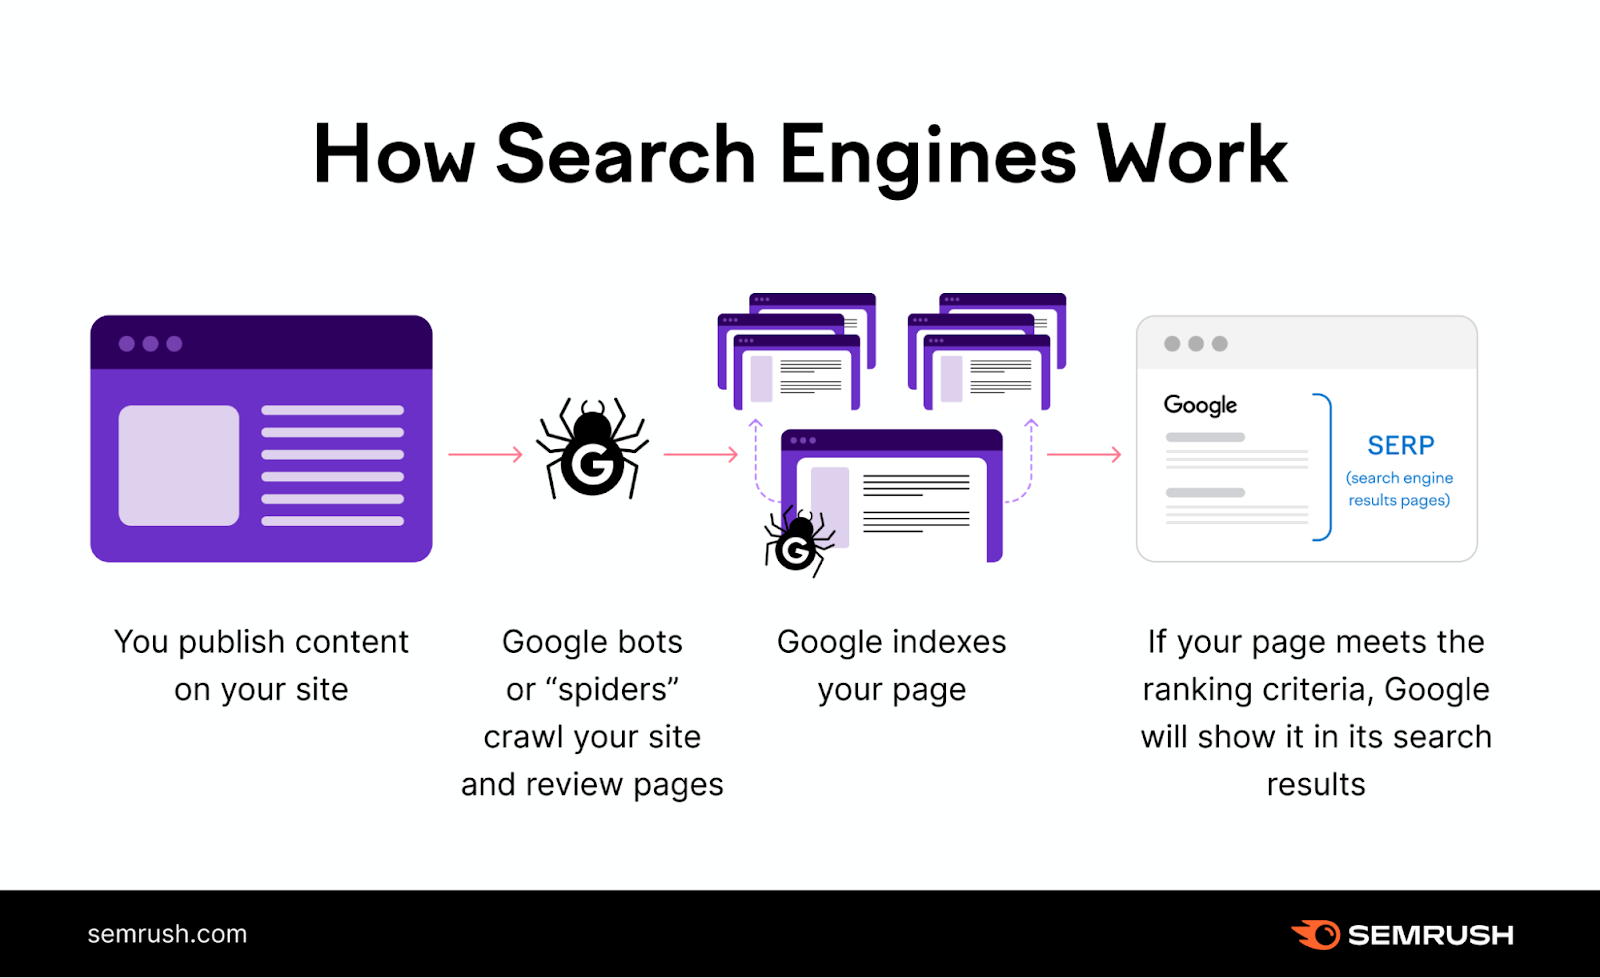 an infographic illustrating how search engines work